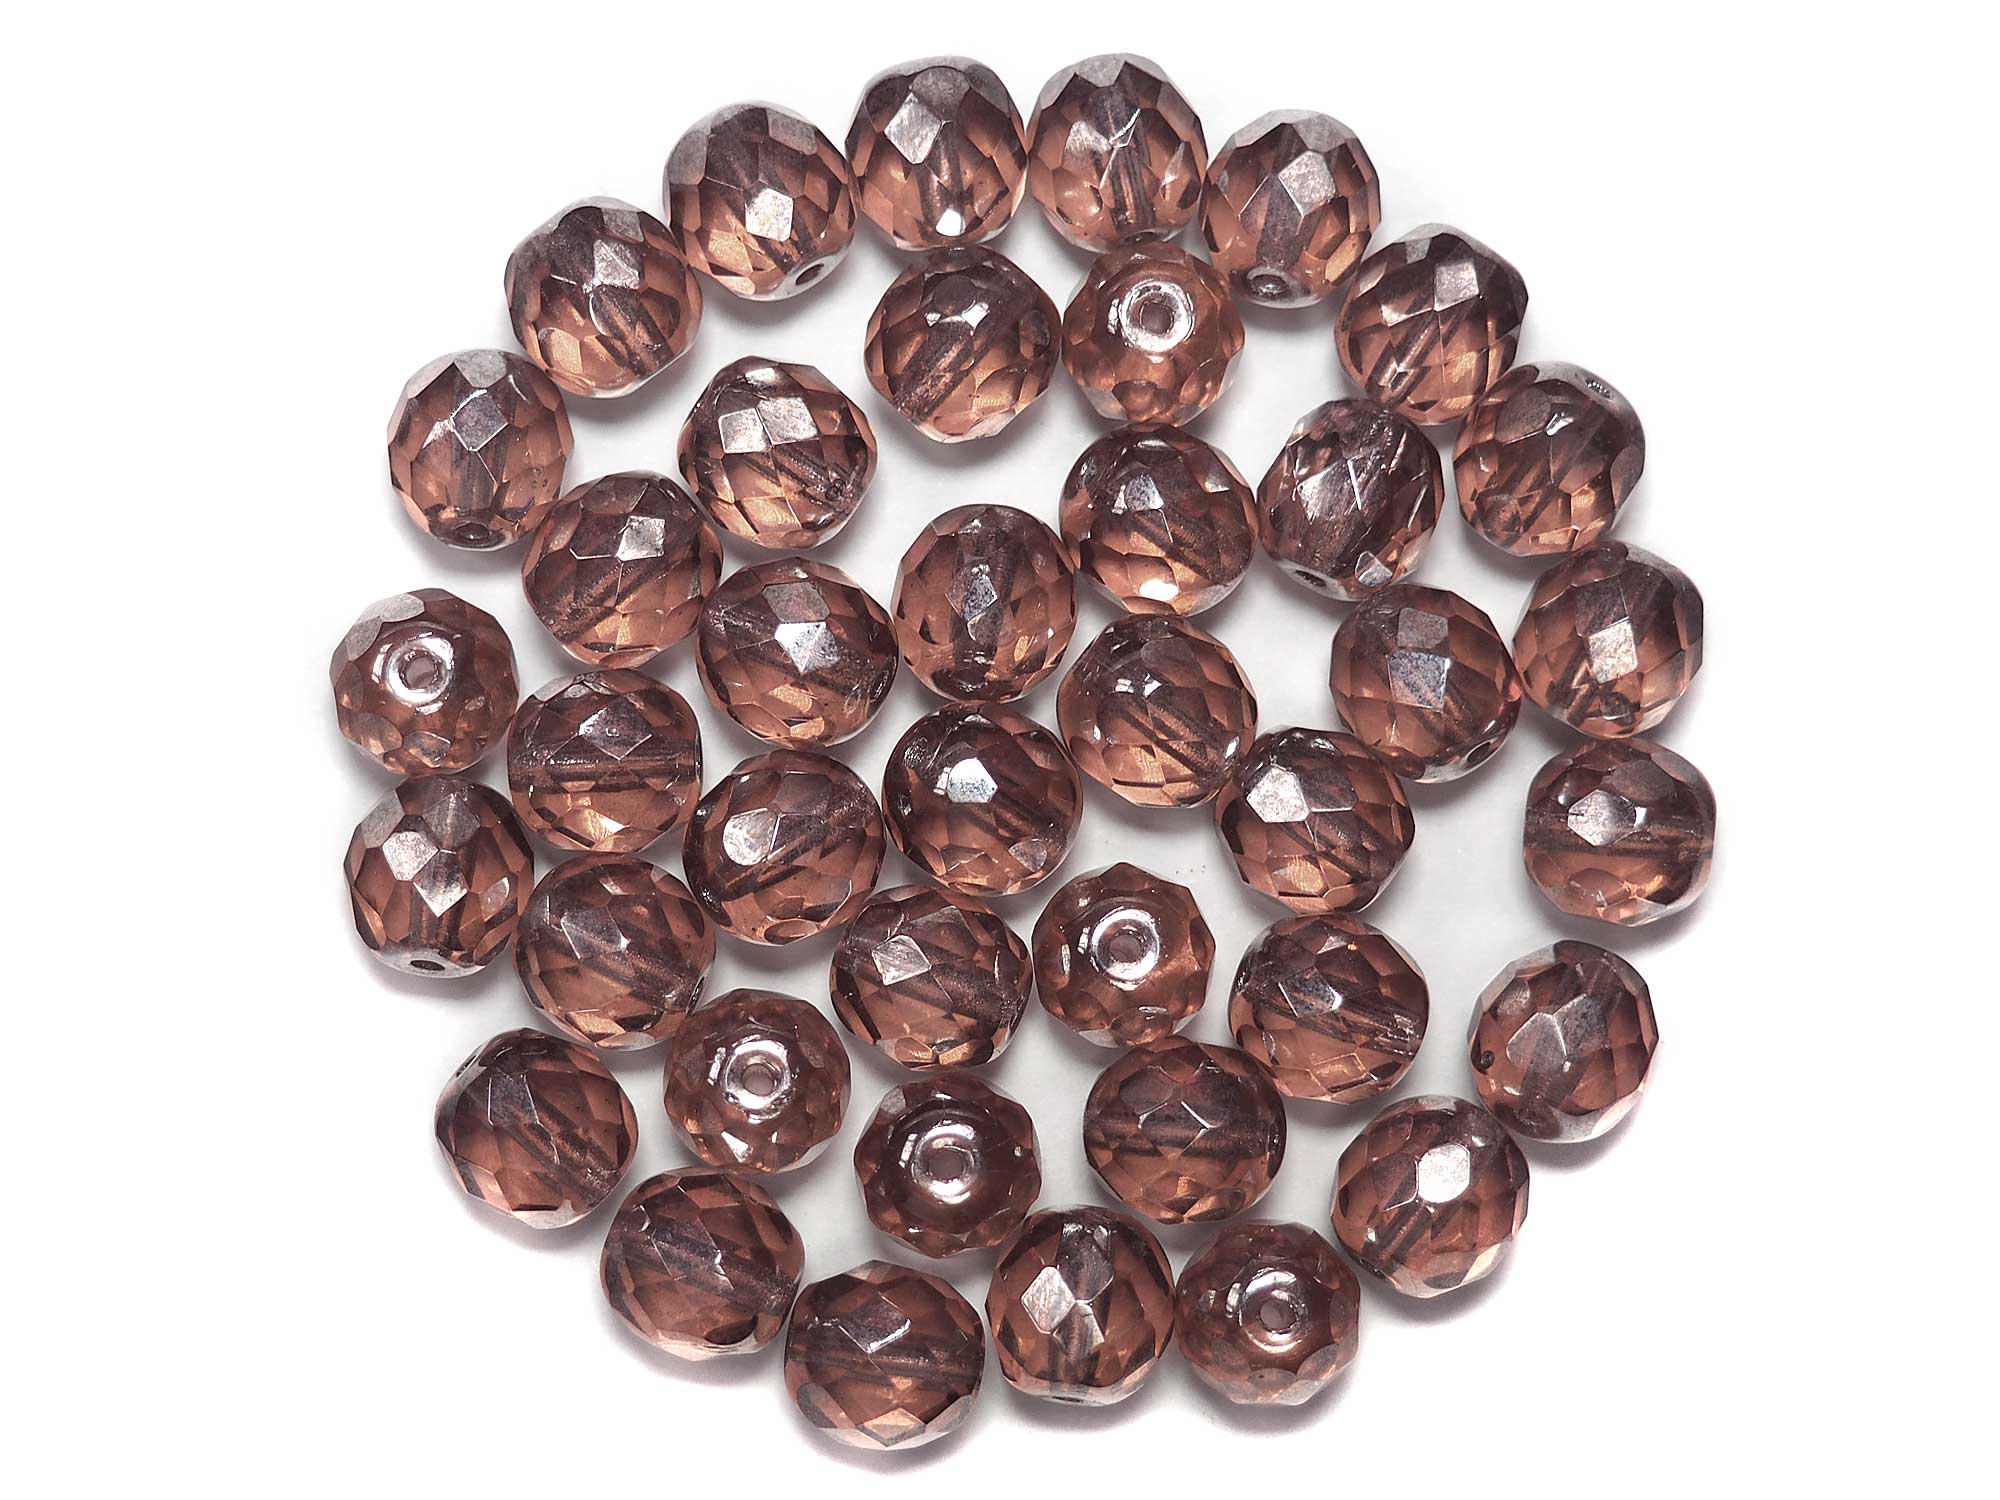 French Rose Silver Luster Fully Coated, Czech Fire Polished Round Faceted Glass Beads, 10mm 24pcs, P504